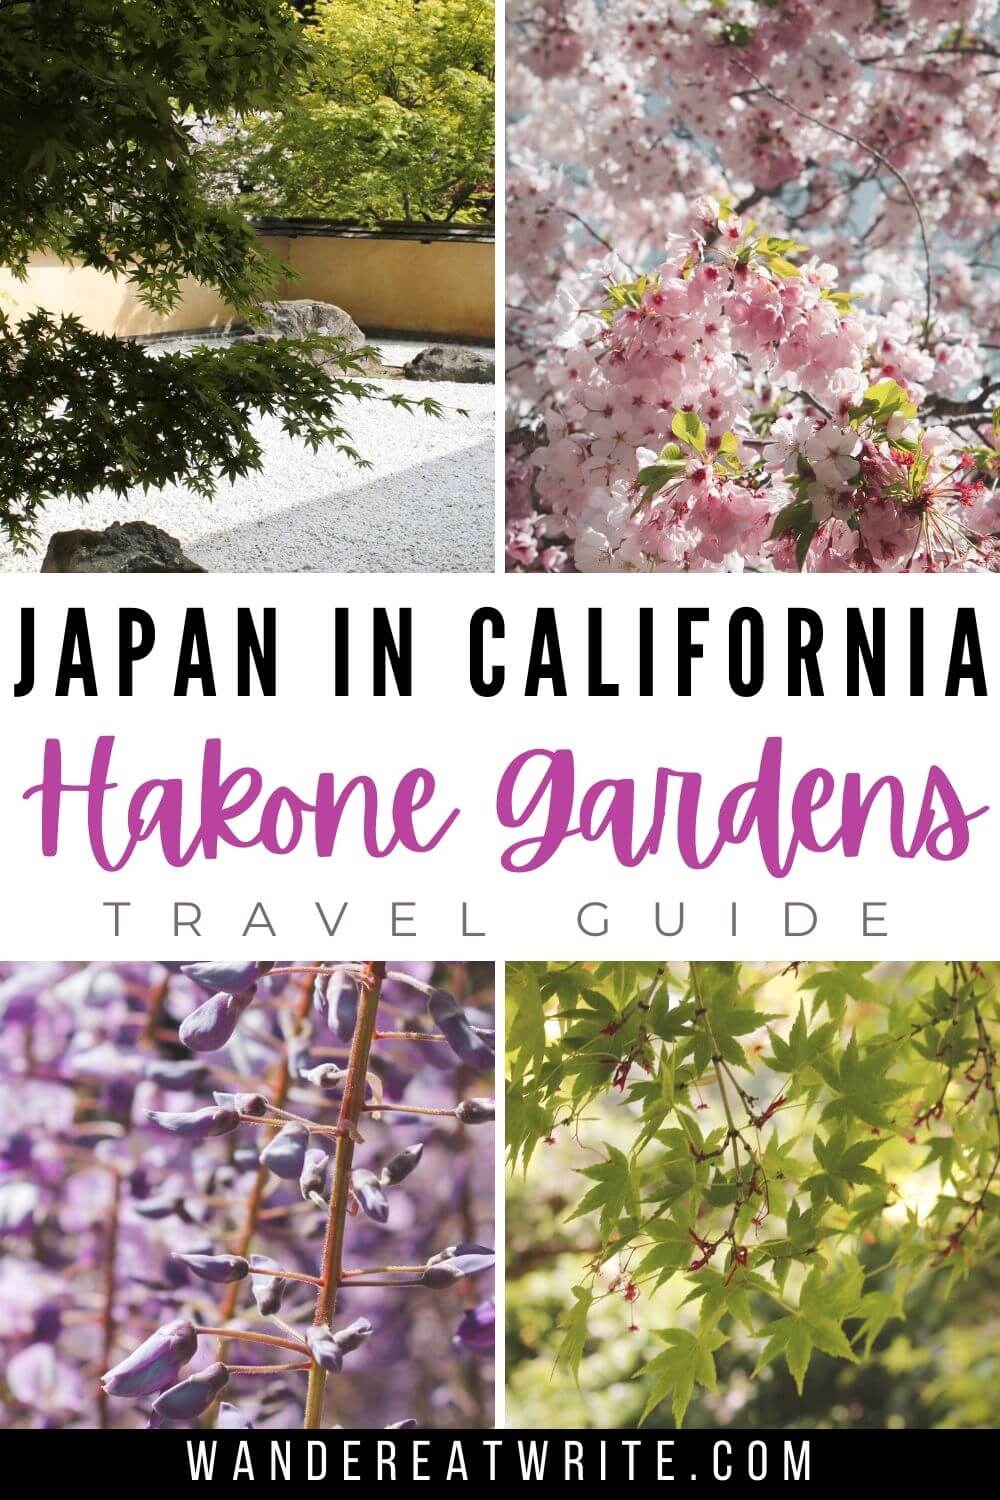 Text: Japan in California: Hakone Gardens travel guide; photos: japanese rock garden, cherry blossoms, wisteria, and maple leaves